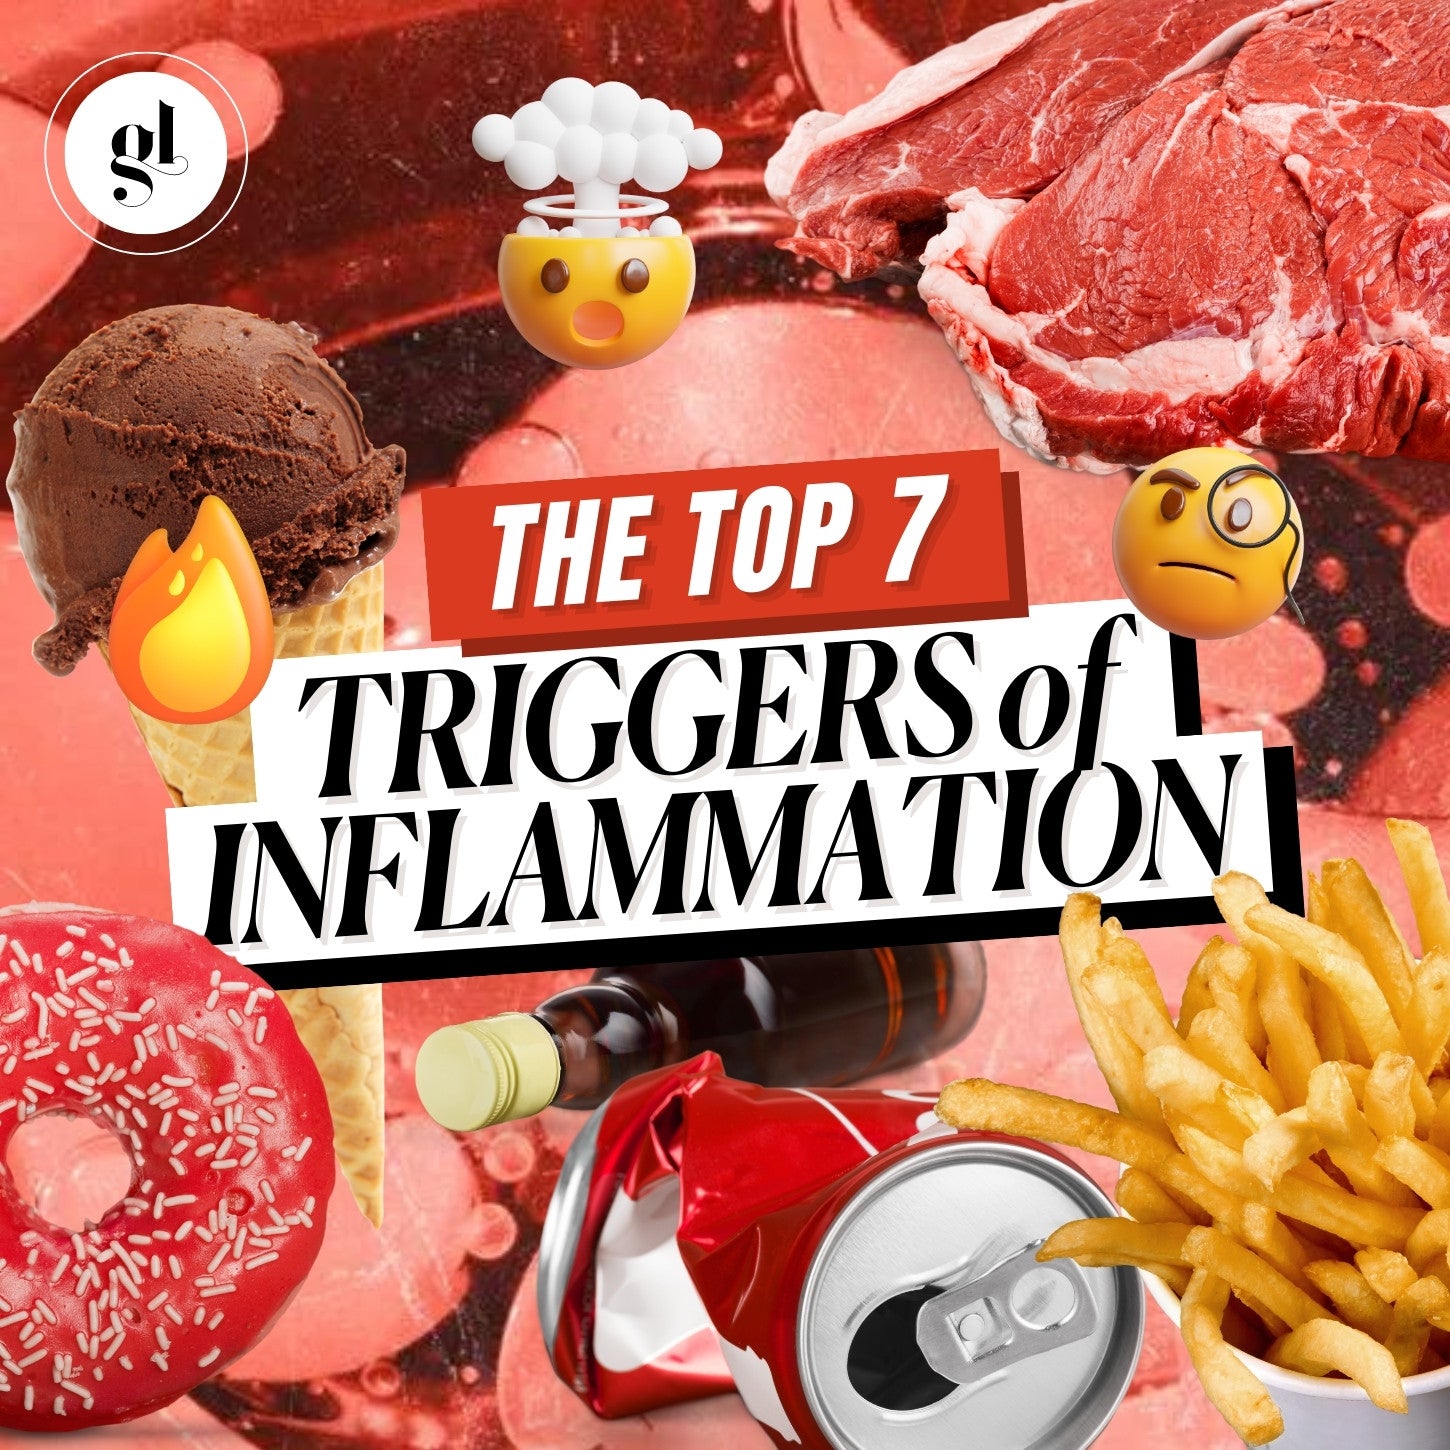 The Top 7 Triggers of Inflammation